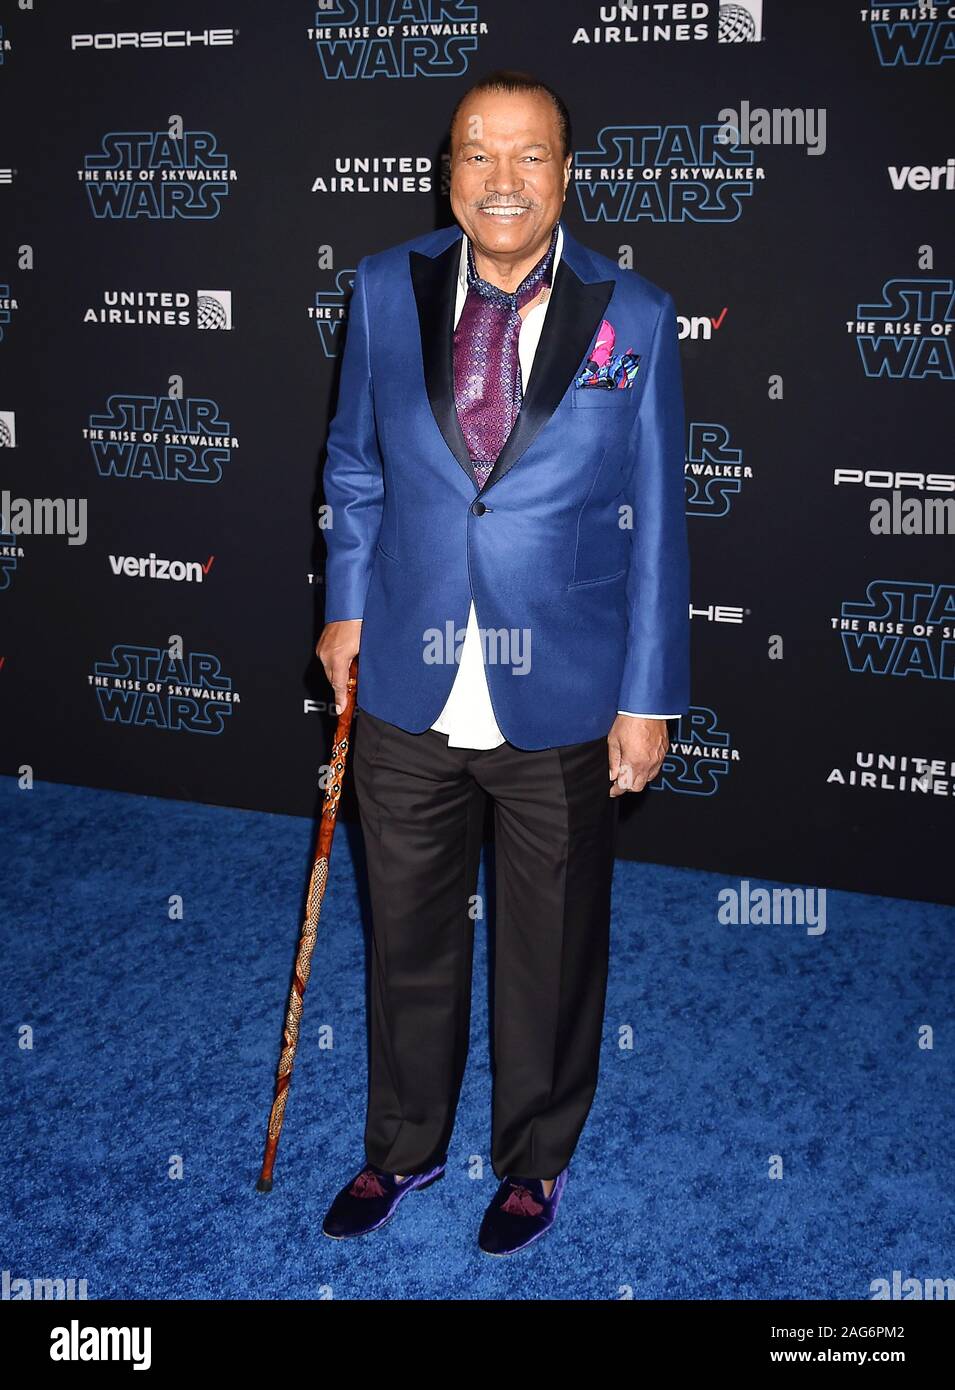 HOLLYWOOD, CA - DECEMBER 16: Billy Dee Williams attends the Premiere of Disney's 'Star Wars: The Rise Of Skywalker' at the El Capitan Theatre on December 16, 2019 in Hollywood, California. Stock Photo